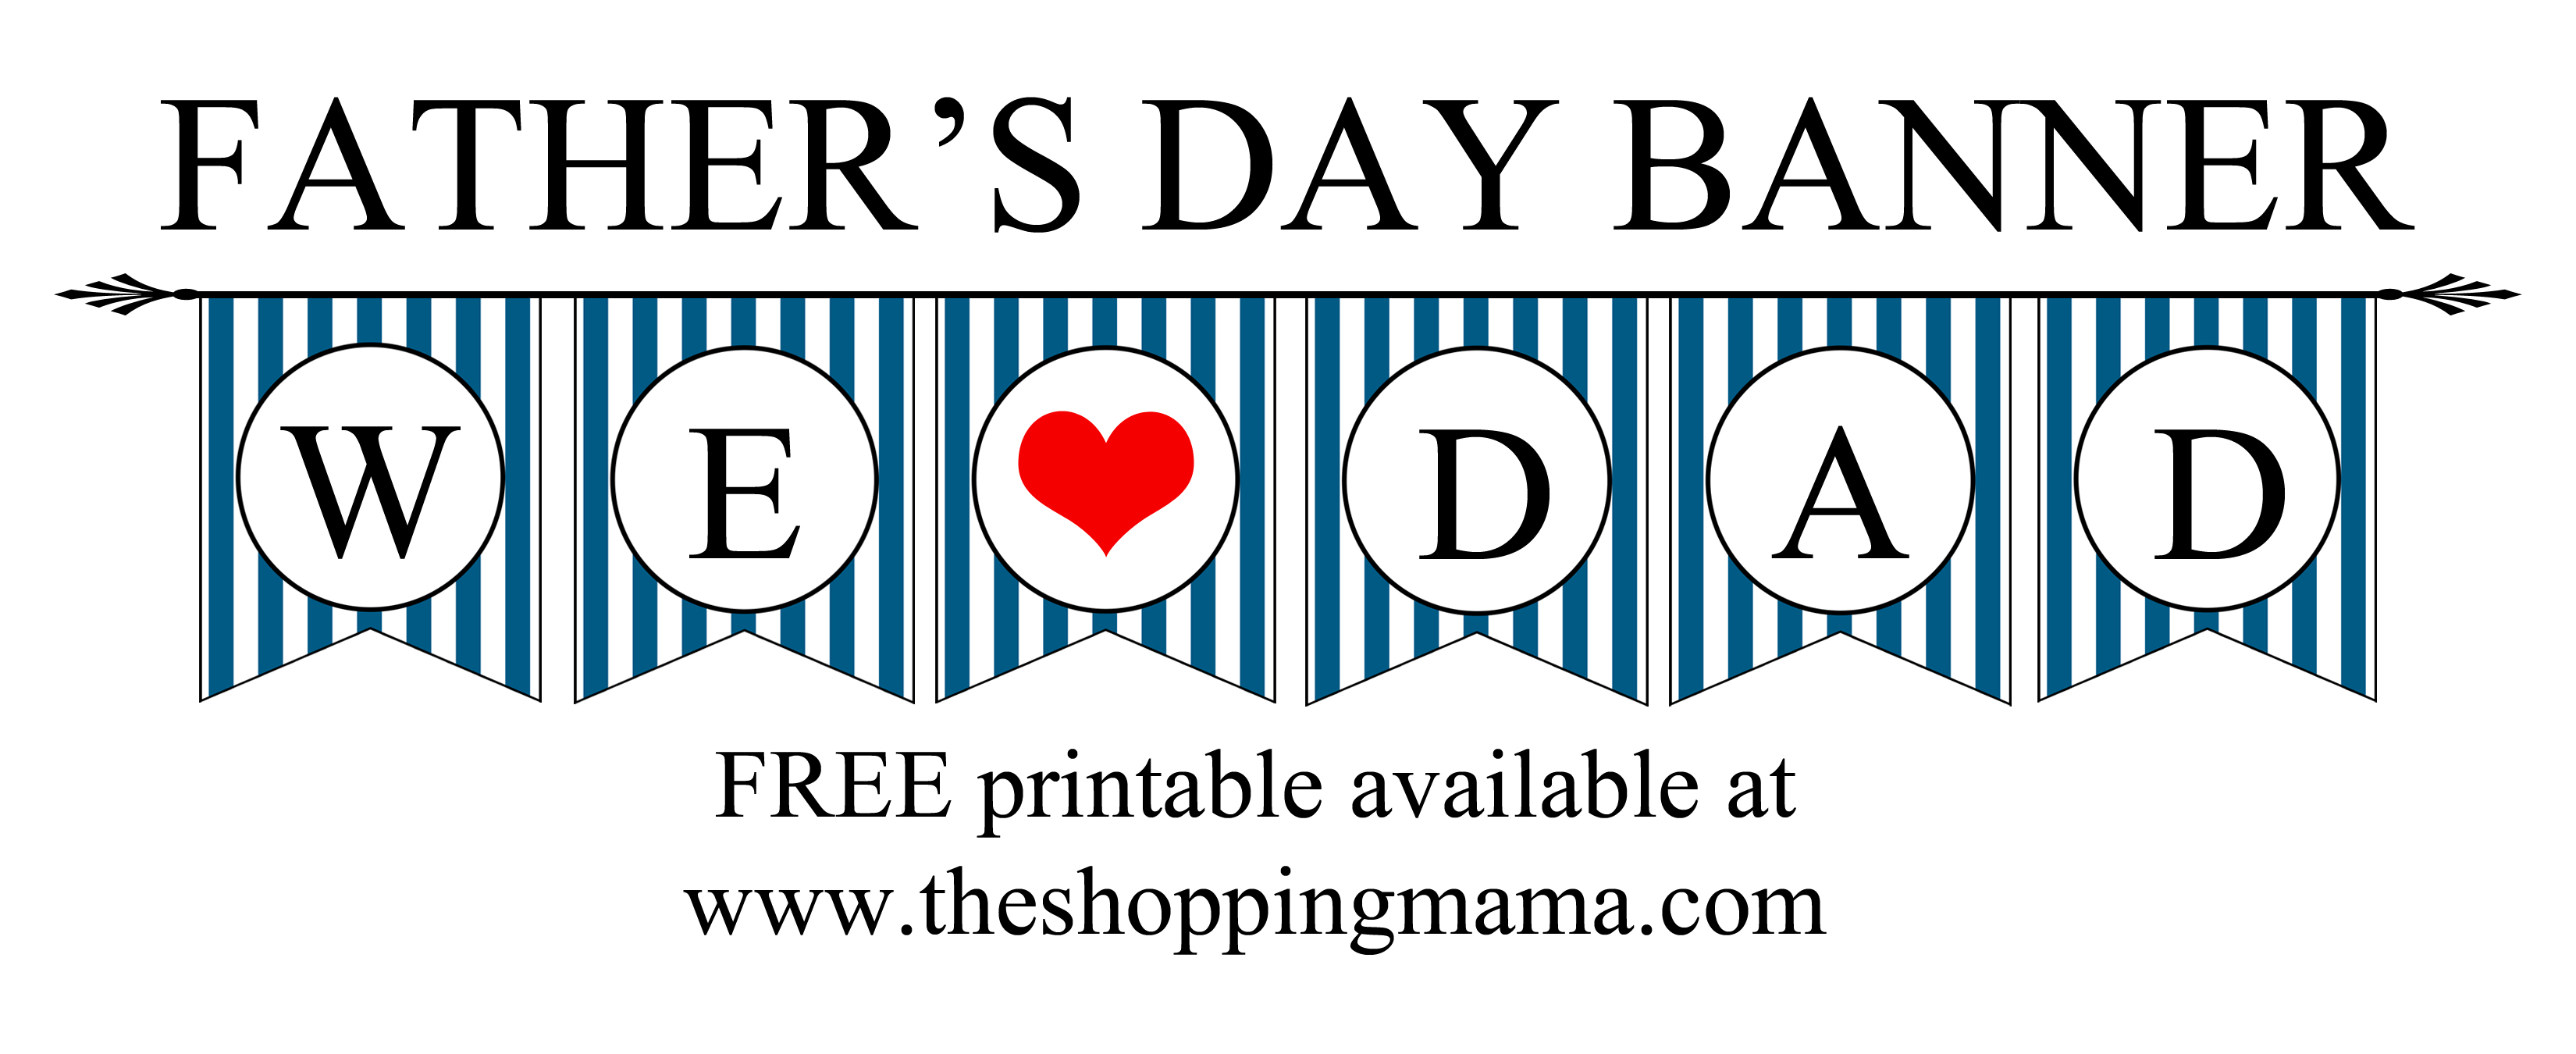 Happy Fathers Day Banner Printable Free Download